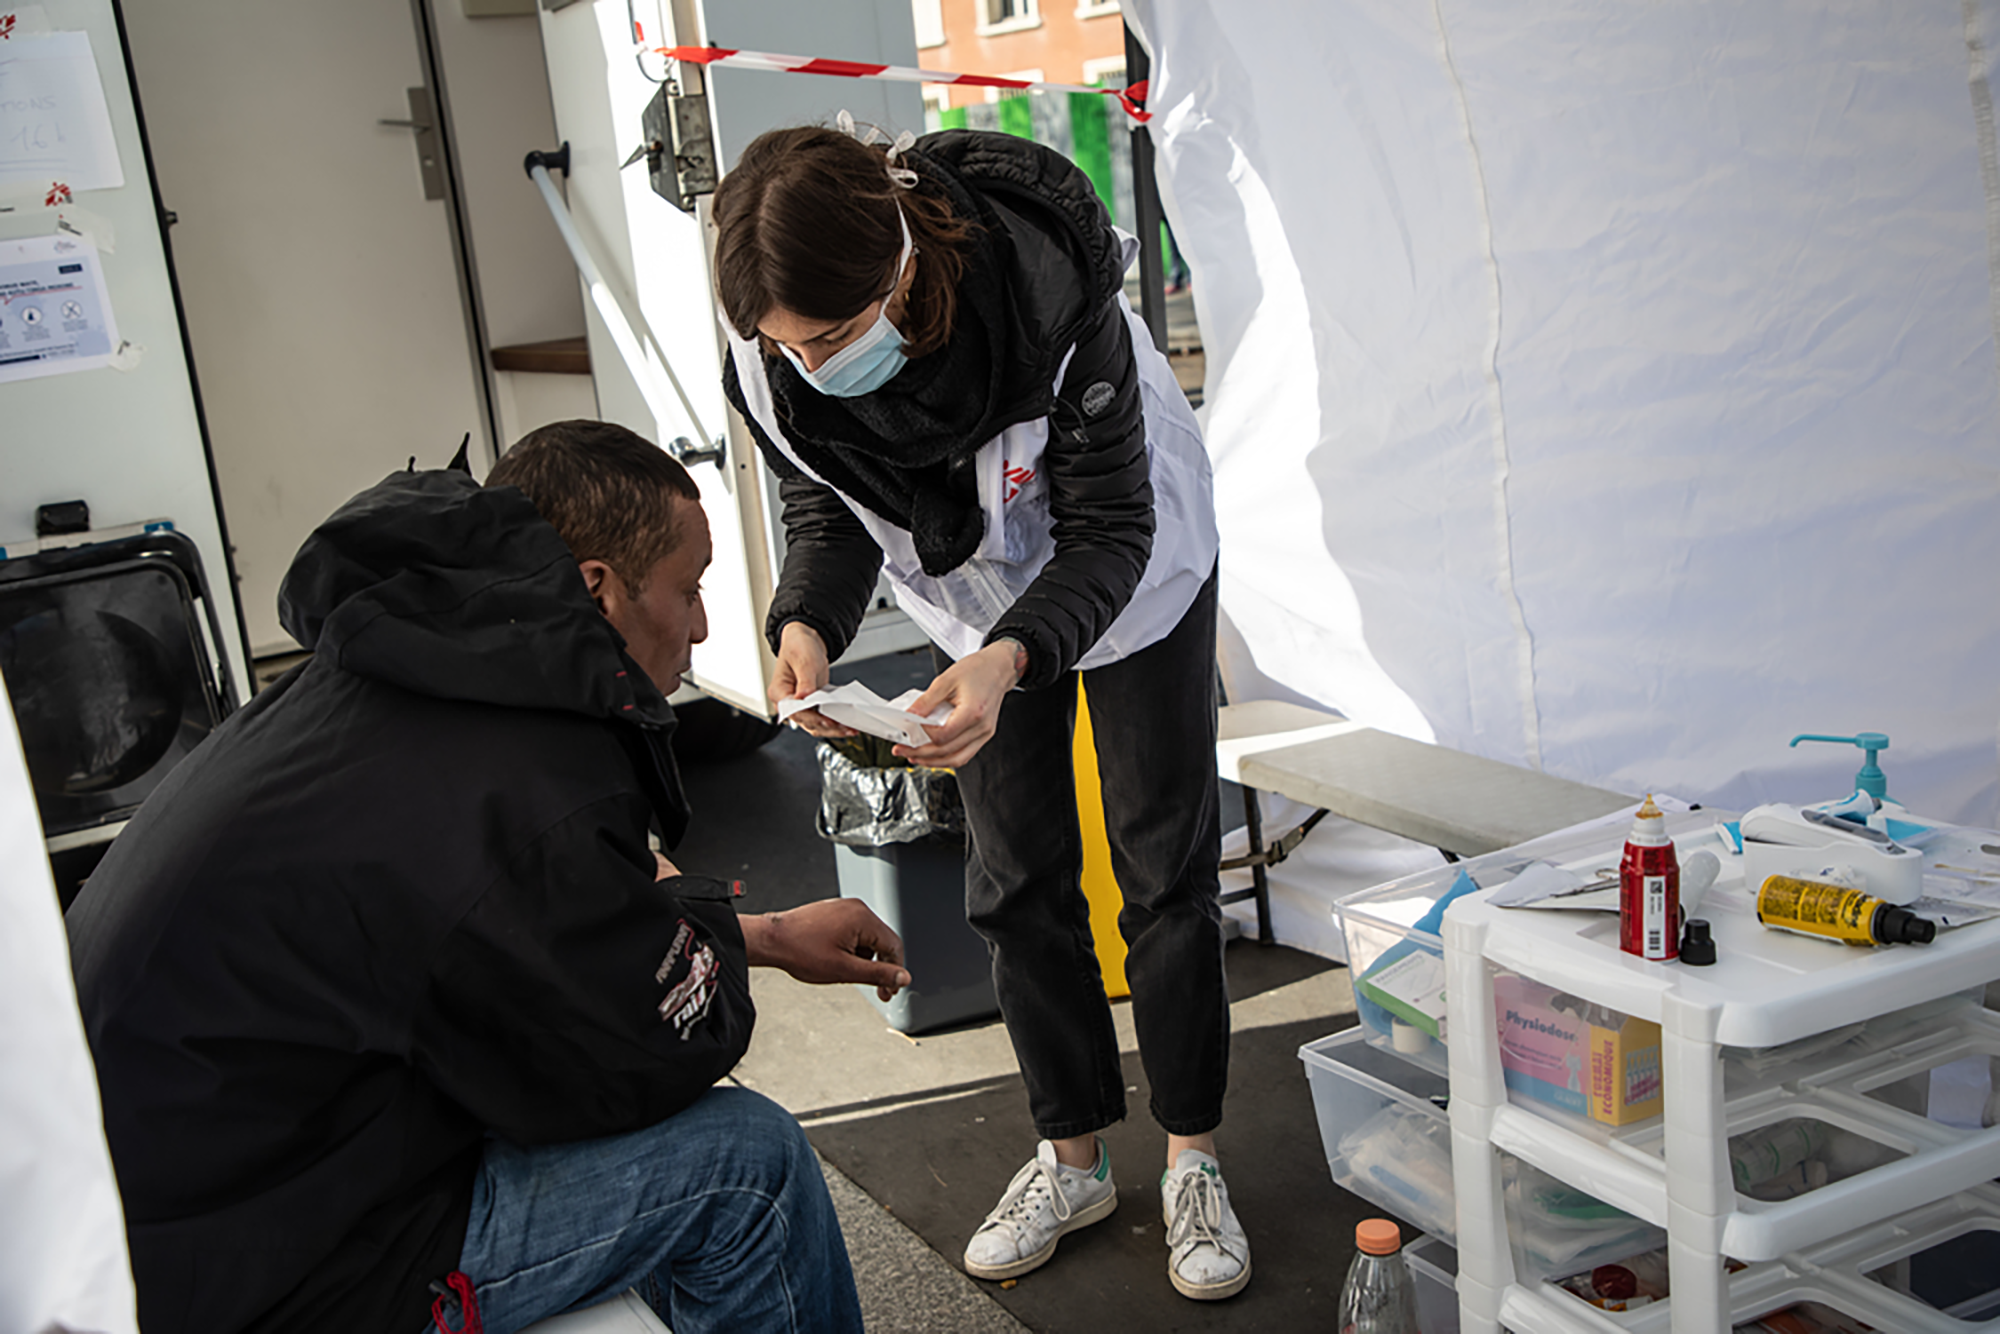 Charline Vincent, nurse, is examining a man in MSF&#039;s mobile clinic. MSF’s mobile clinic provides primary healthcare to people who live rough on the streets in Paris and its suburbs. © Agnes Varraine-Leca/MSF